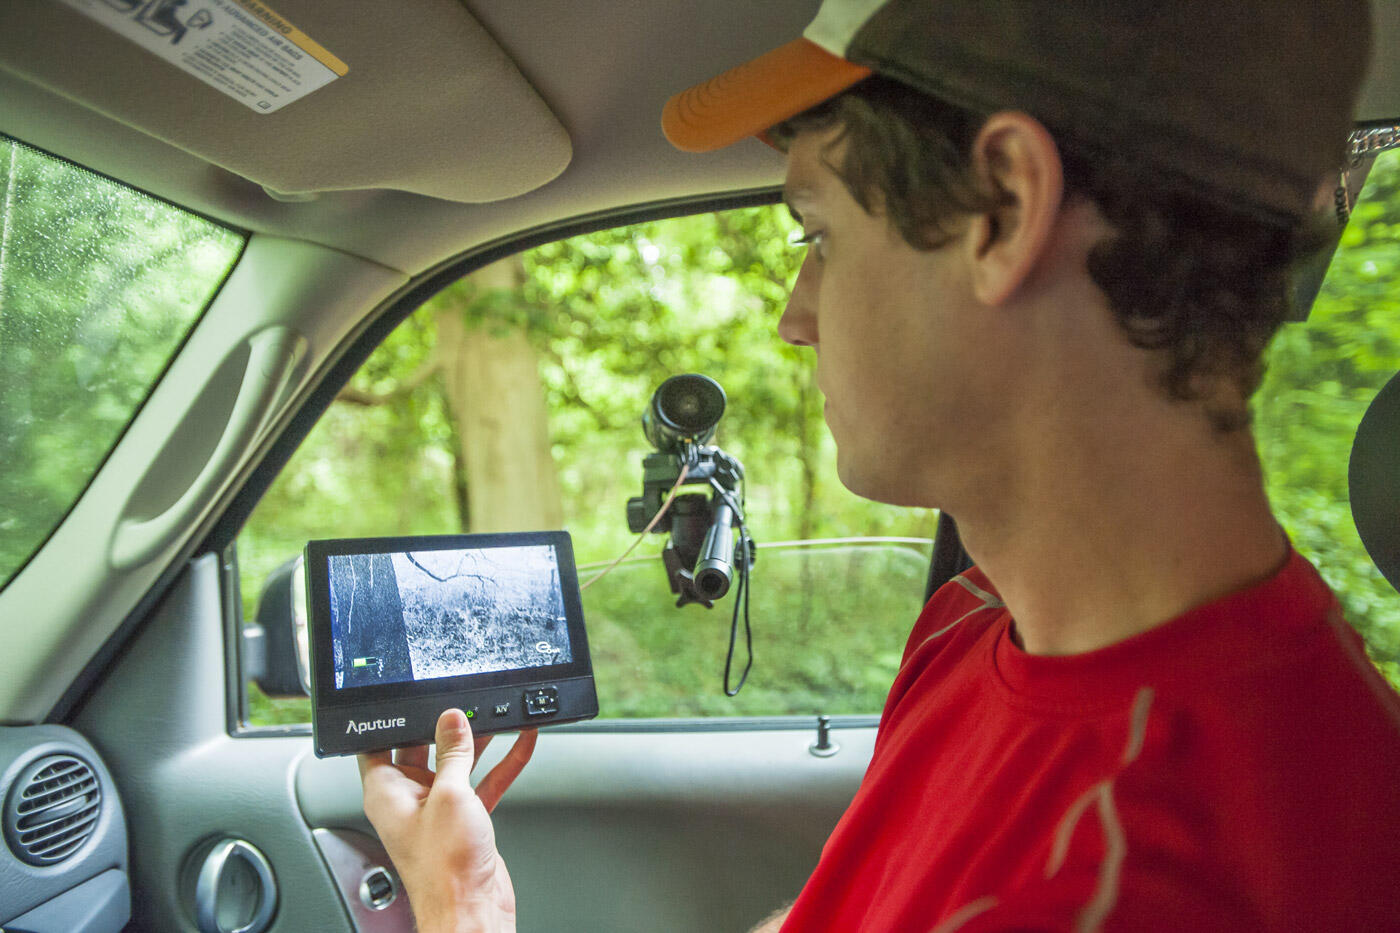 Ryan Levering, a senior environmental studies major, demonstrates the use of the a thermal imaging camera, which the team uses to find birds' nests in Bryan Park.